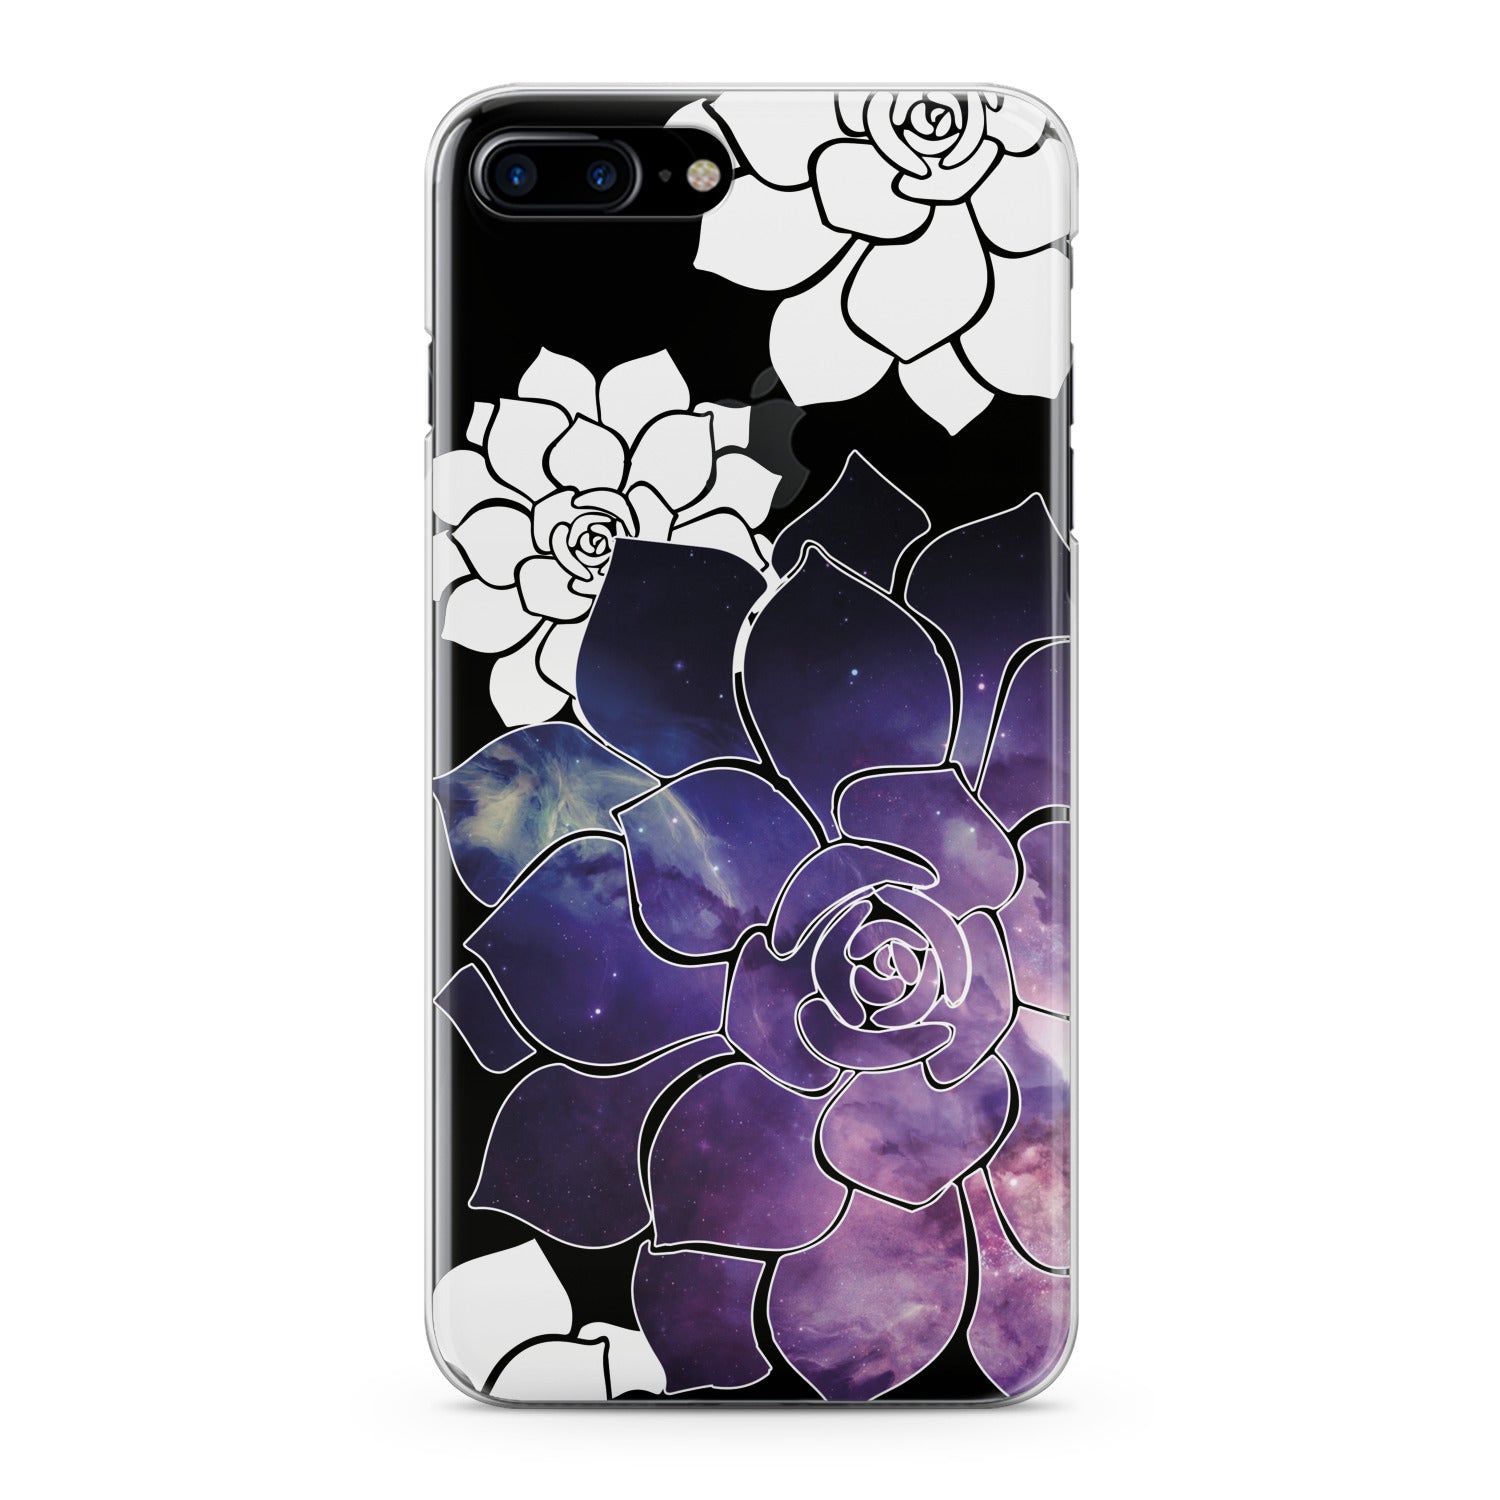 Lex Altern Abstract Flowers Phone Case for your iPhone & Android phone.